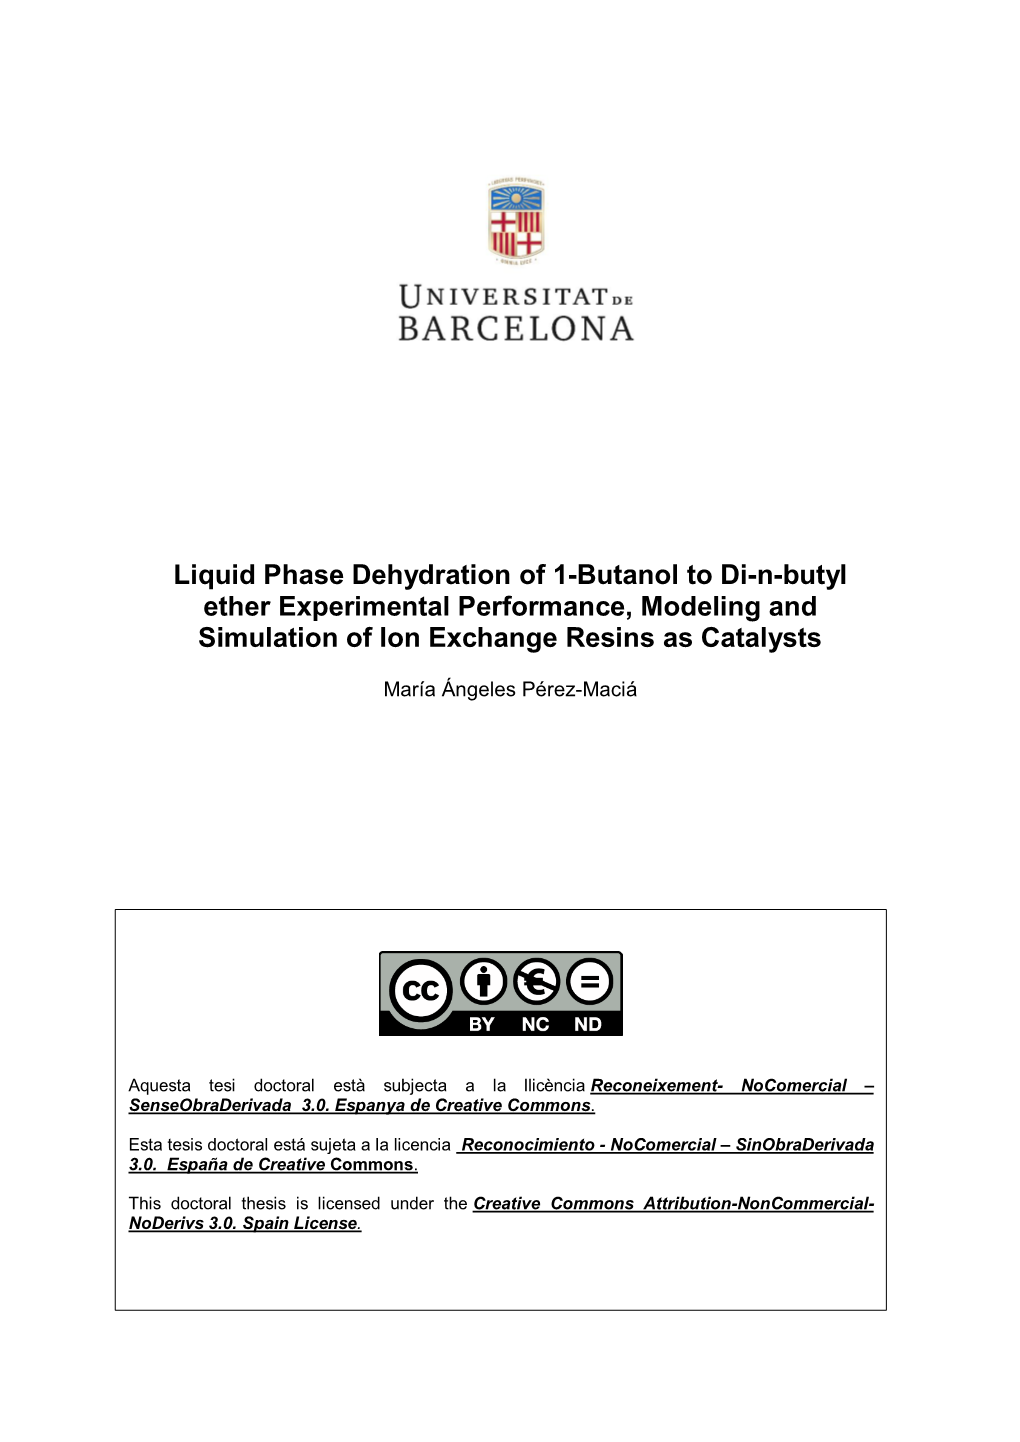 Liquid Phase Dehydration of 1-Butanol to Di-N-Butyl Ether Experimental Performance, Modeling and Simulation of Ion Exchange Resi